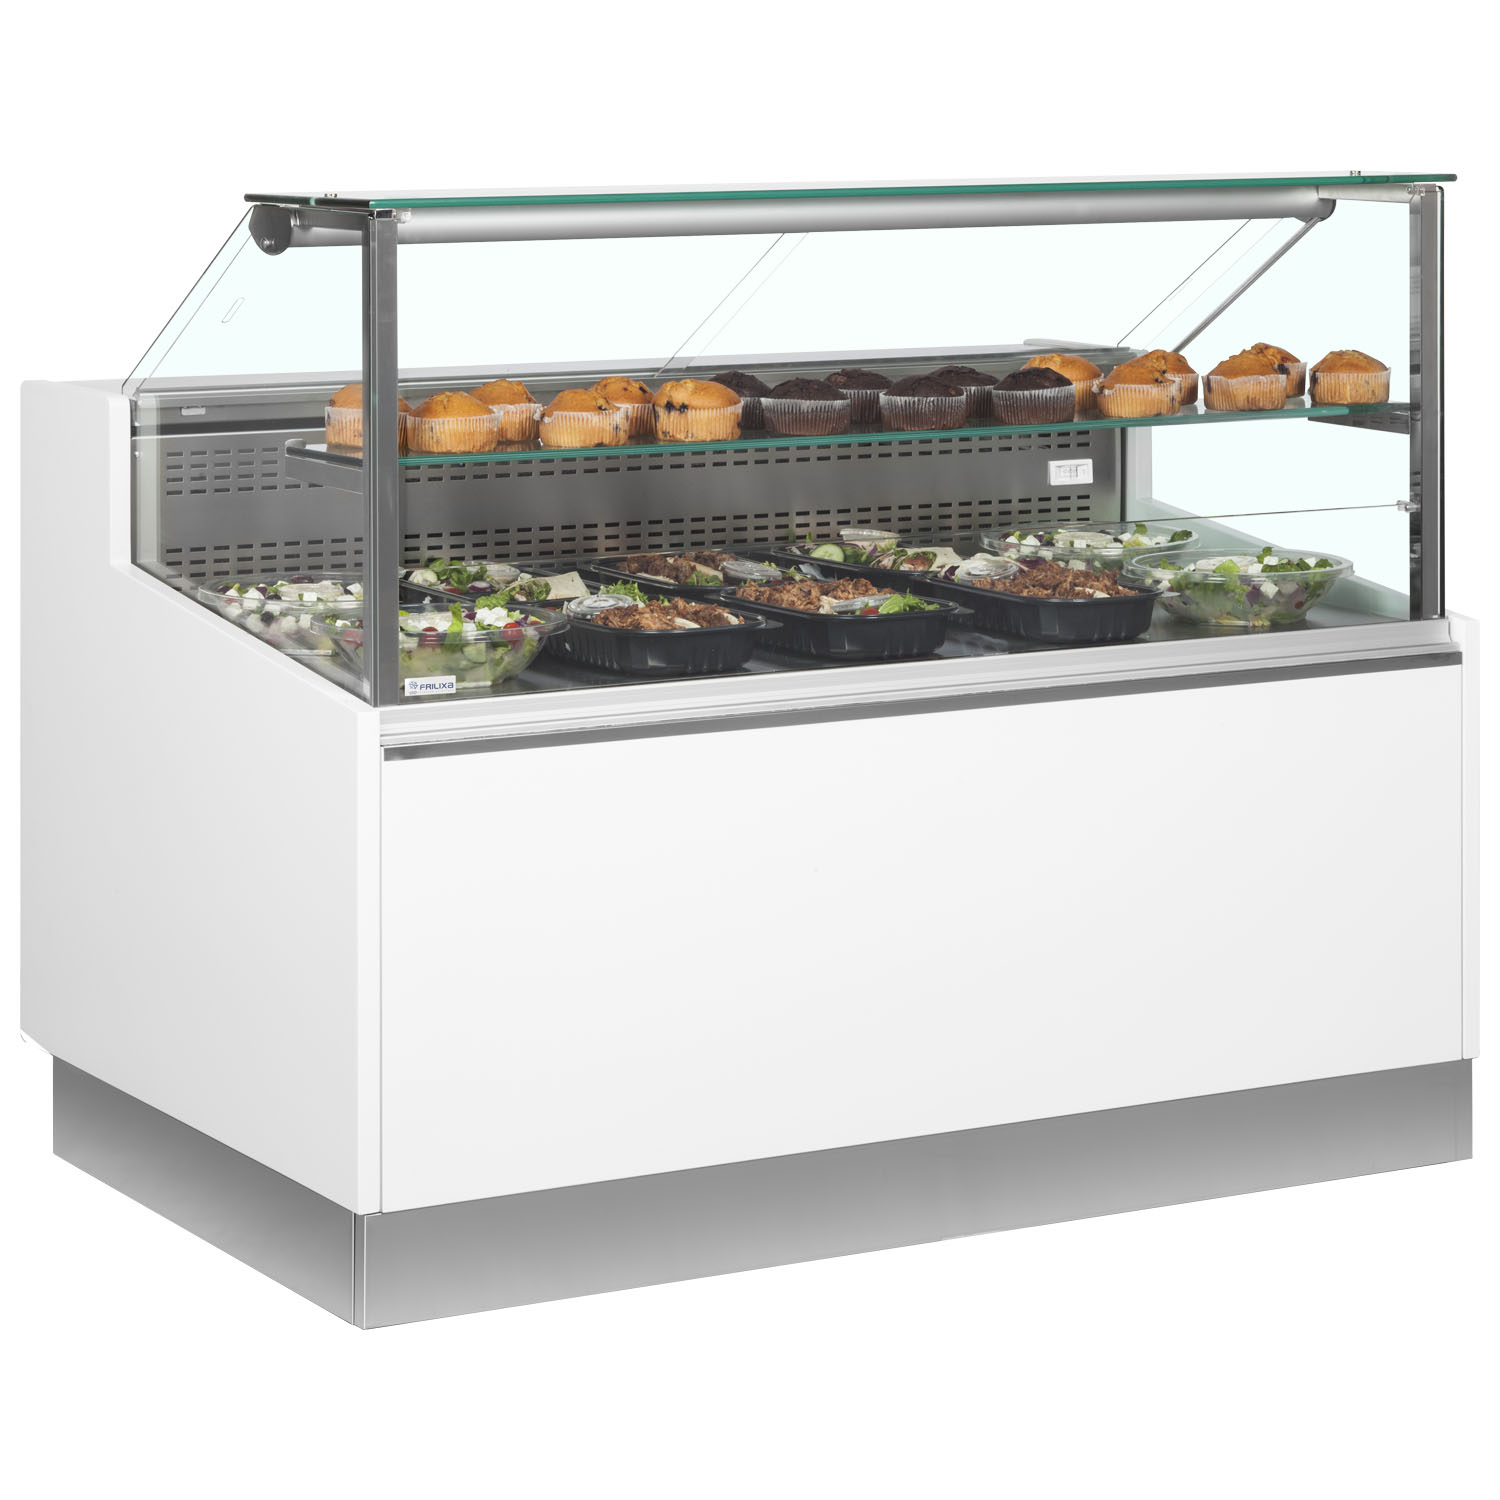 An image of Trimco Brabant Slimline Serve Over Counter-1953mm-24 Months Parts and 12 Months ...